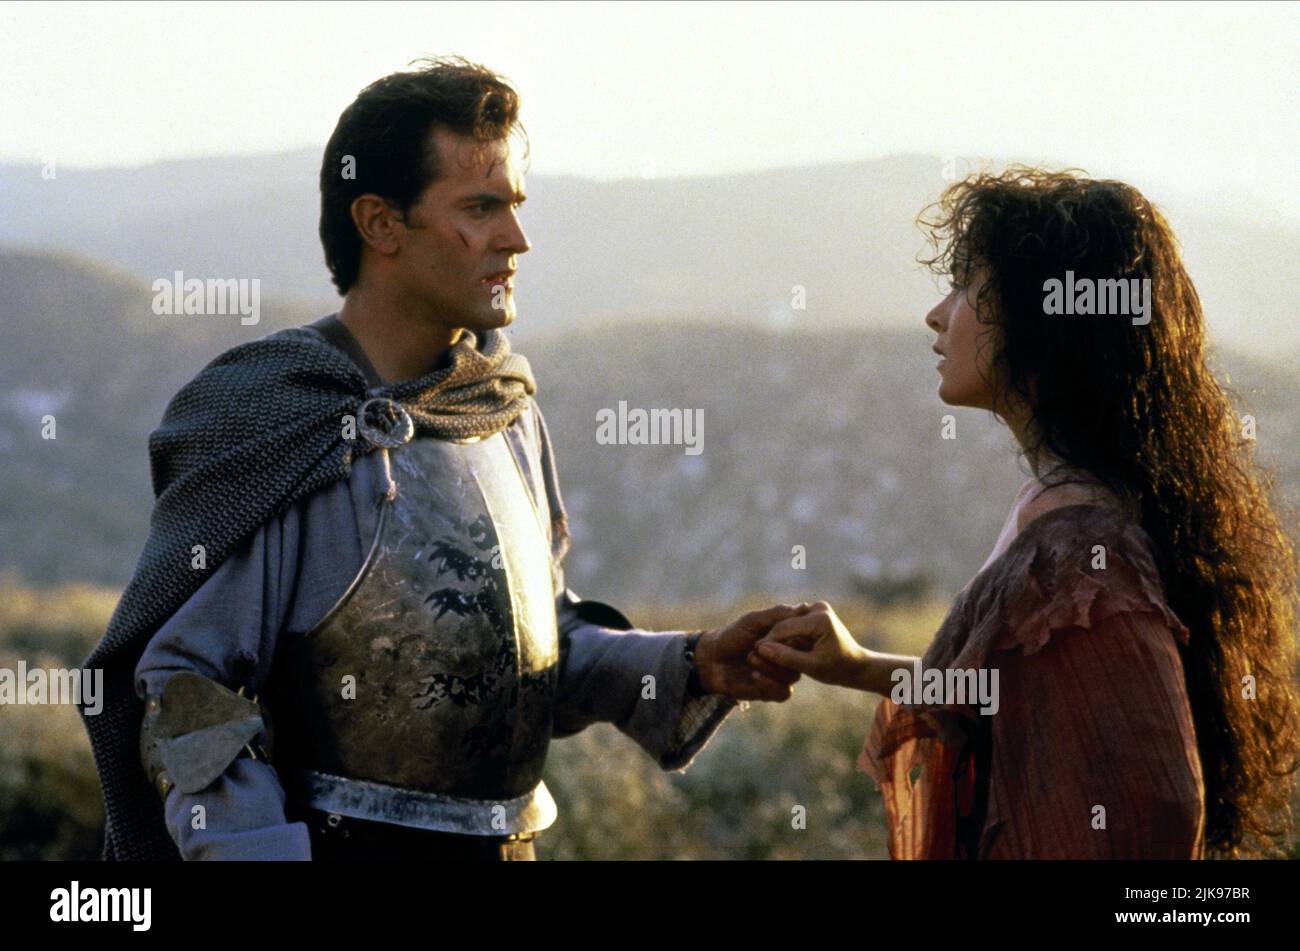 Bruce Campbell Film: Army Of Darkness; Evil Dead 3: Army Of Darkness (USA  1992) Characters: Ash / Aka Evil Dead 3: Army Of Darkness Director: Sam  Raimi 09 October 1992 **WARNING** This